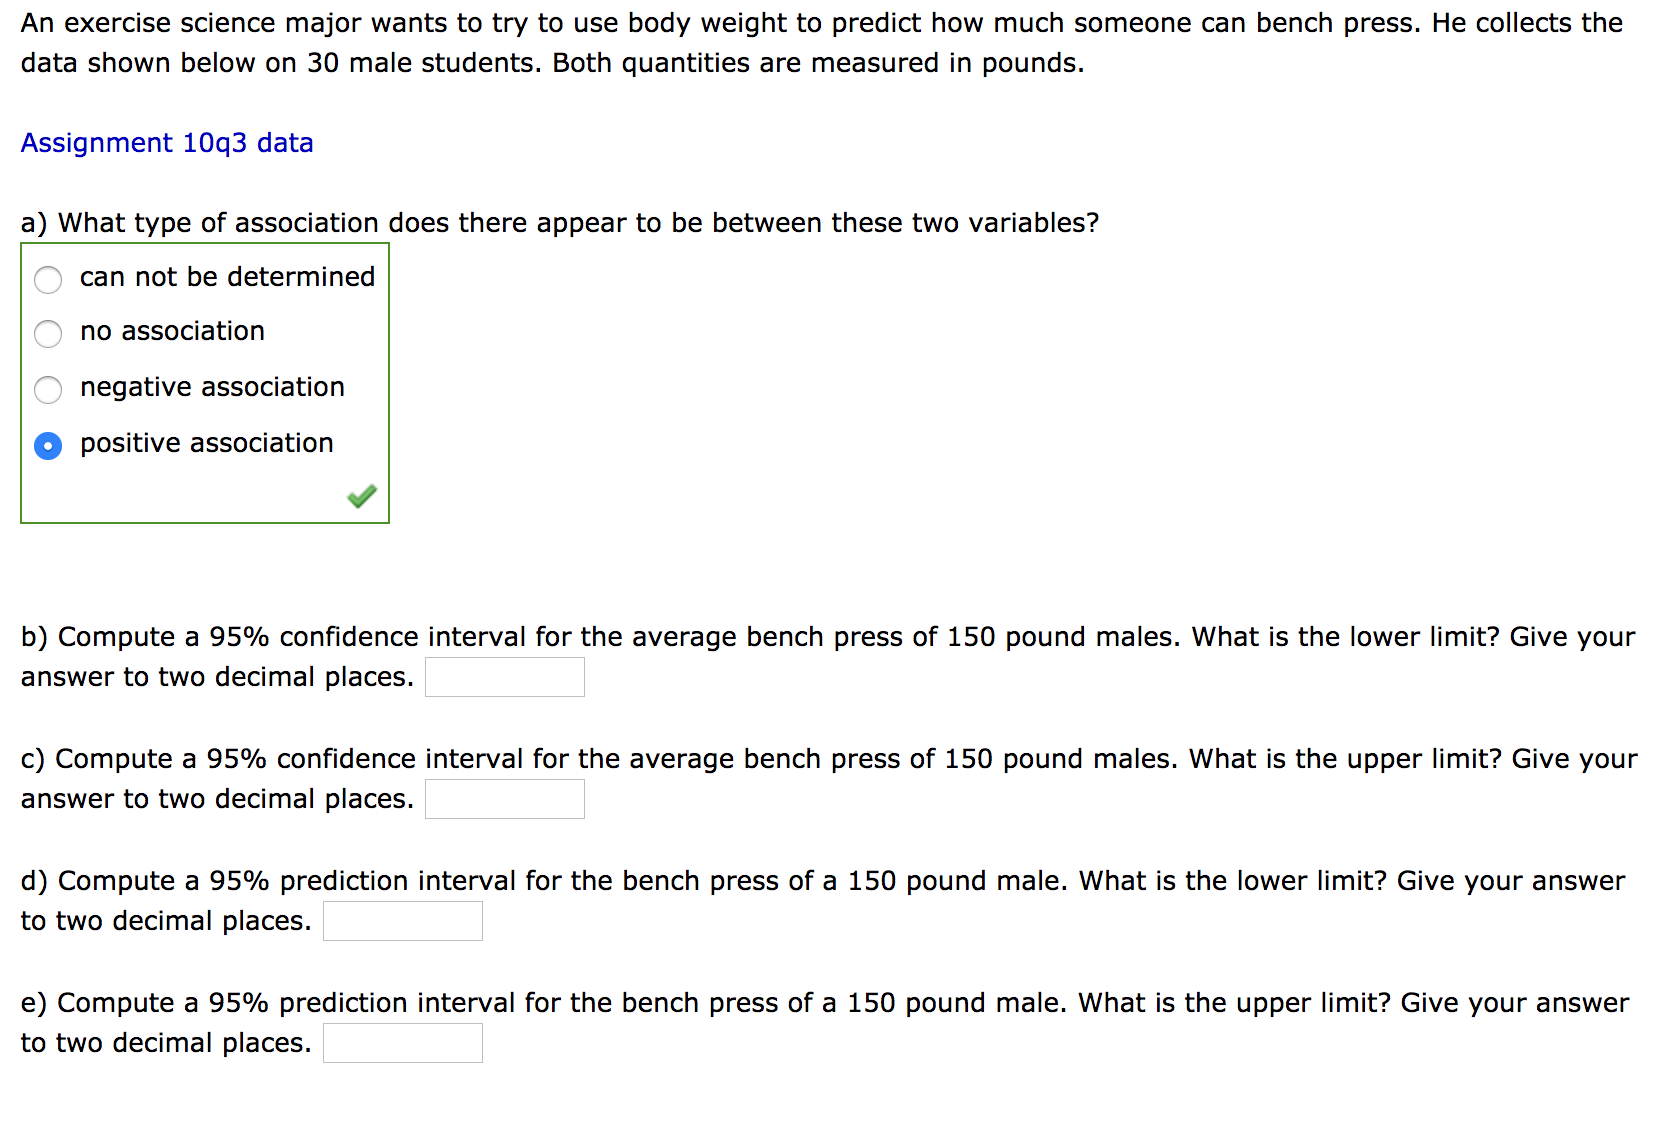 An exercise science major wants to try to use body weight to predict how much someone can bench press. He collects the
data shown below on 30 male students. Both quantities are measured in pounds.
Assignment 10q3 data
a) What type of association does there appear to be between these two variables?
can not be determined
no association
negative association
positive association
b) Compute a 95% confidence interval for the average bench press of 150 pound males. What is the lower limit? Give your
answer to two decimal places.
c) Compute a 95% confidence interval for the average bench press of 150 pound males. What is the upper limit? Give your
answer to two decimal places.
d) Compute a 95% prediction interval for the bench press of a 150 pound male. What is the lower limit? Give your answer
to two decimal places.
e) Compute a 95% prediction interval for the bench press of a 150 pound male. What is the upper limit? Give your answer
to two decimal places.
OO O
